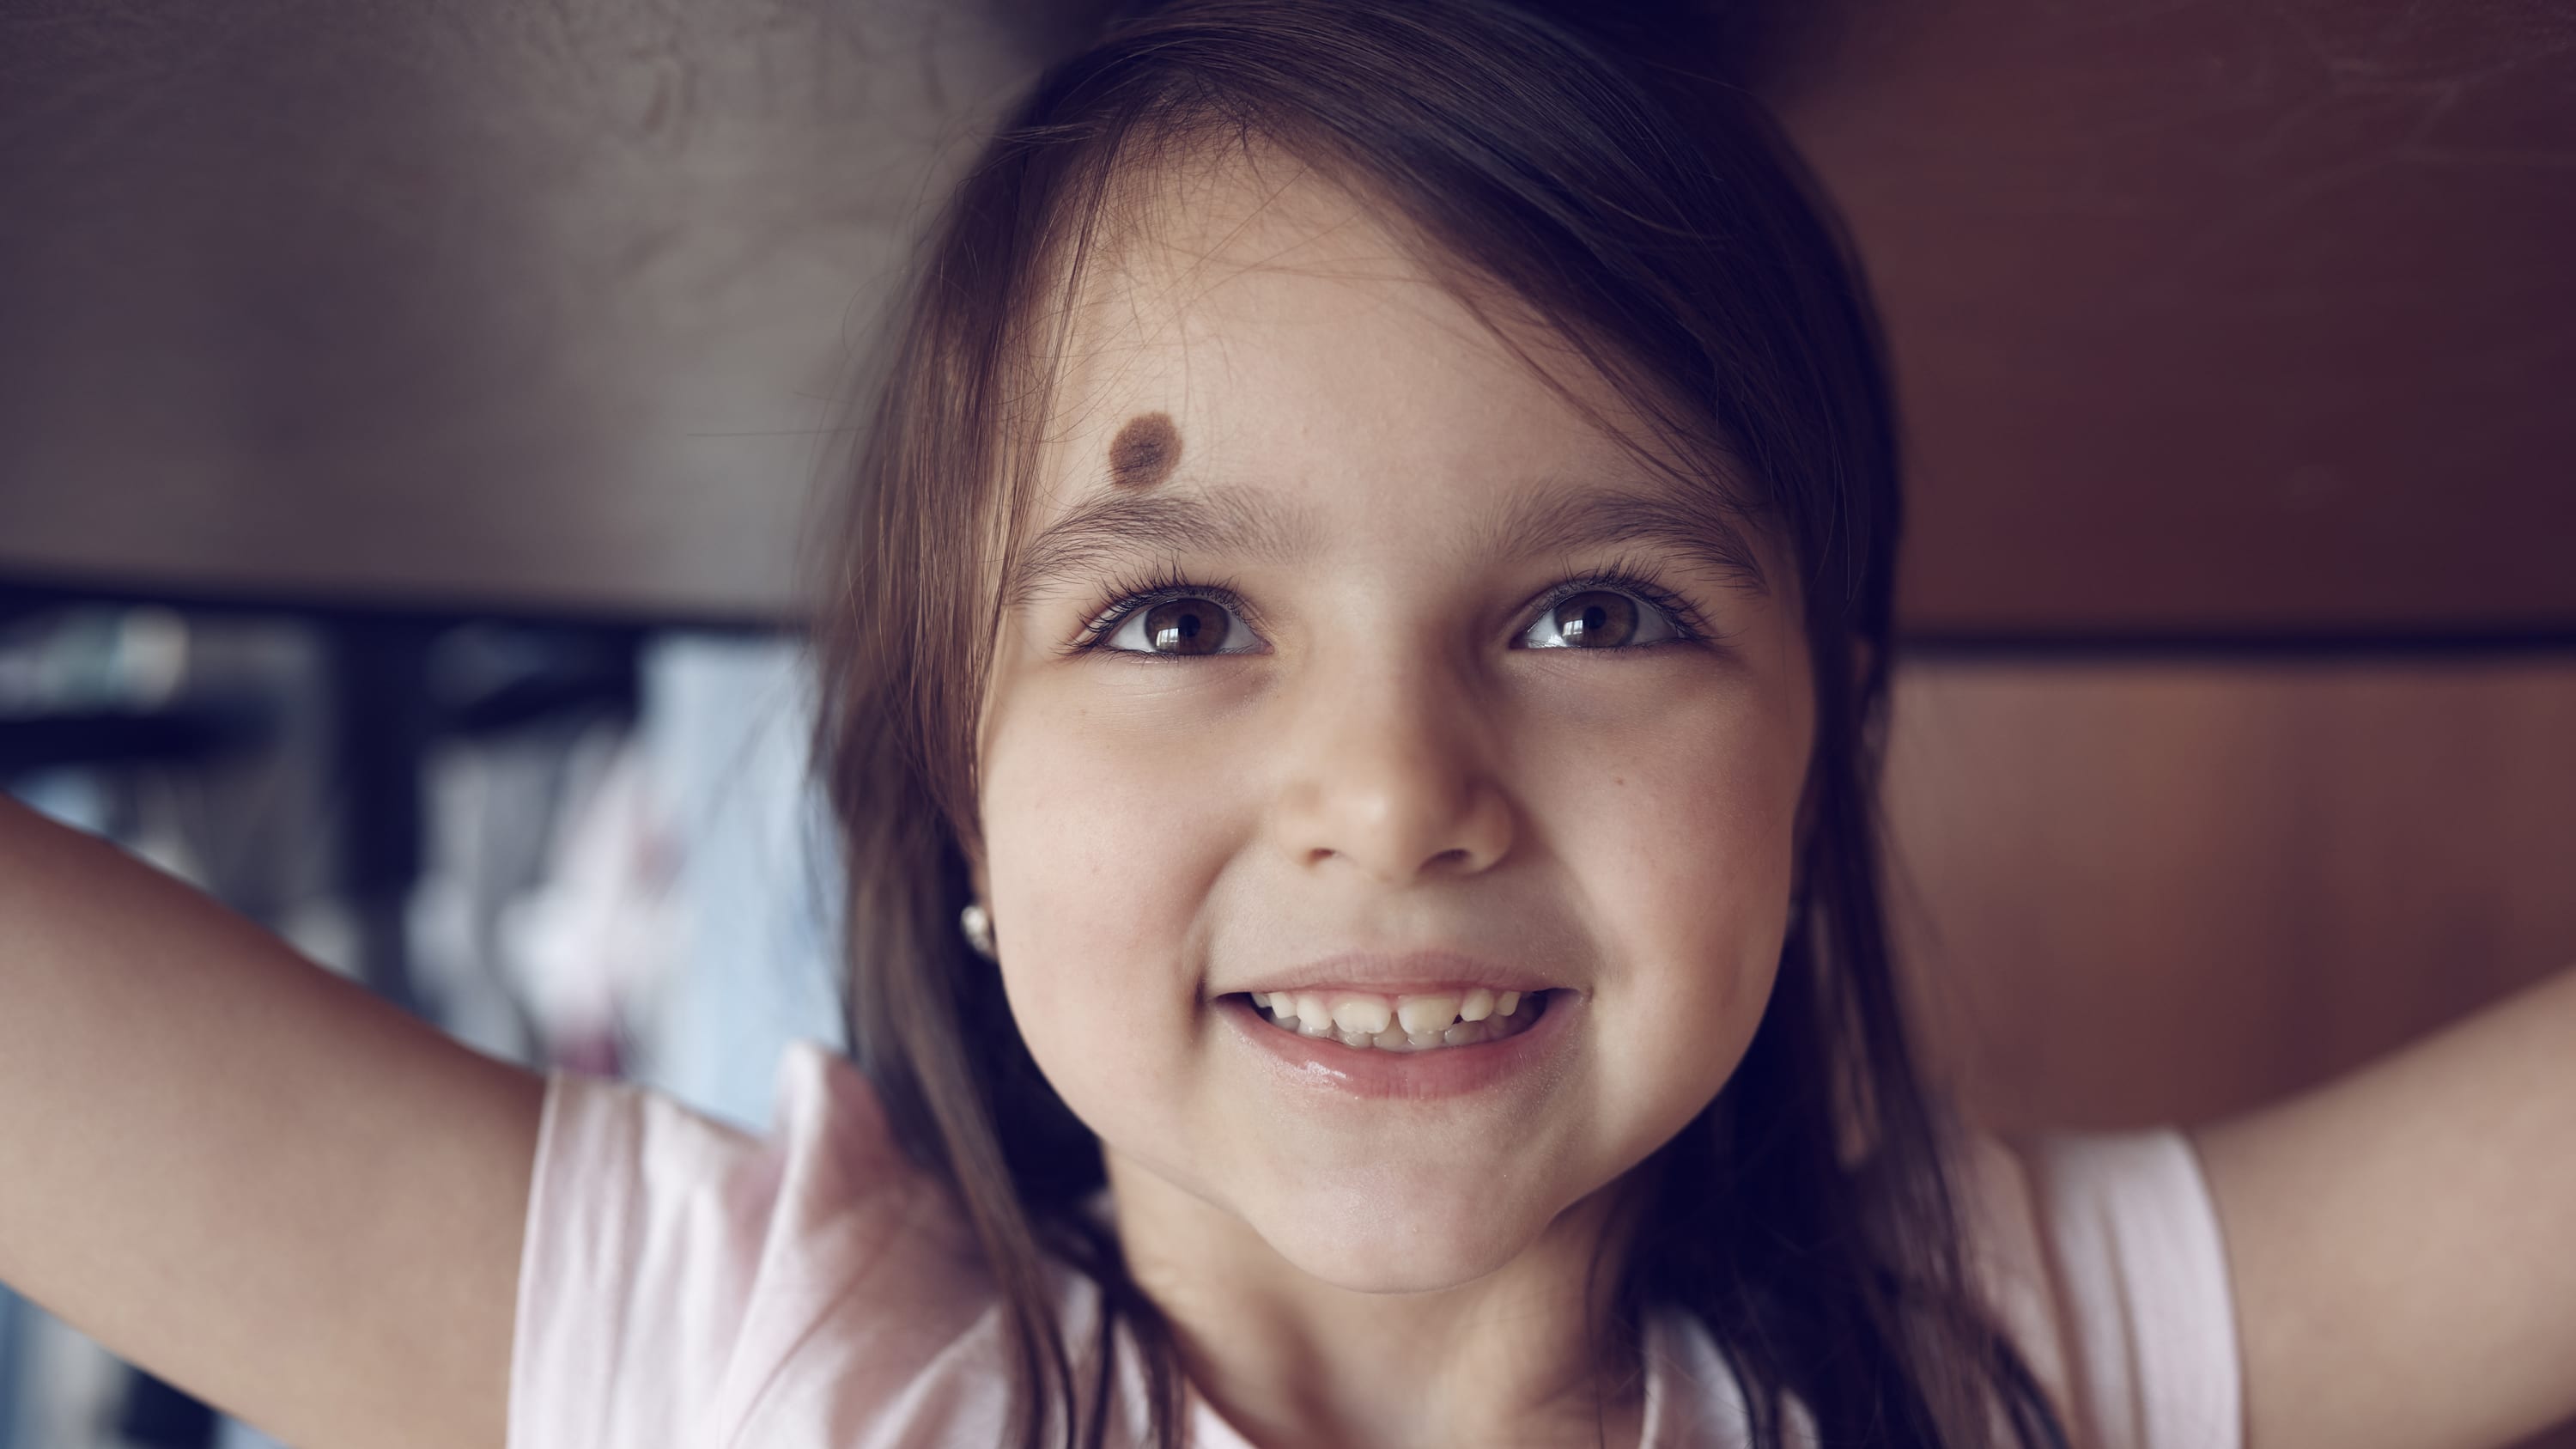 a young girl with a large birthmark on her forehead smiles